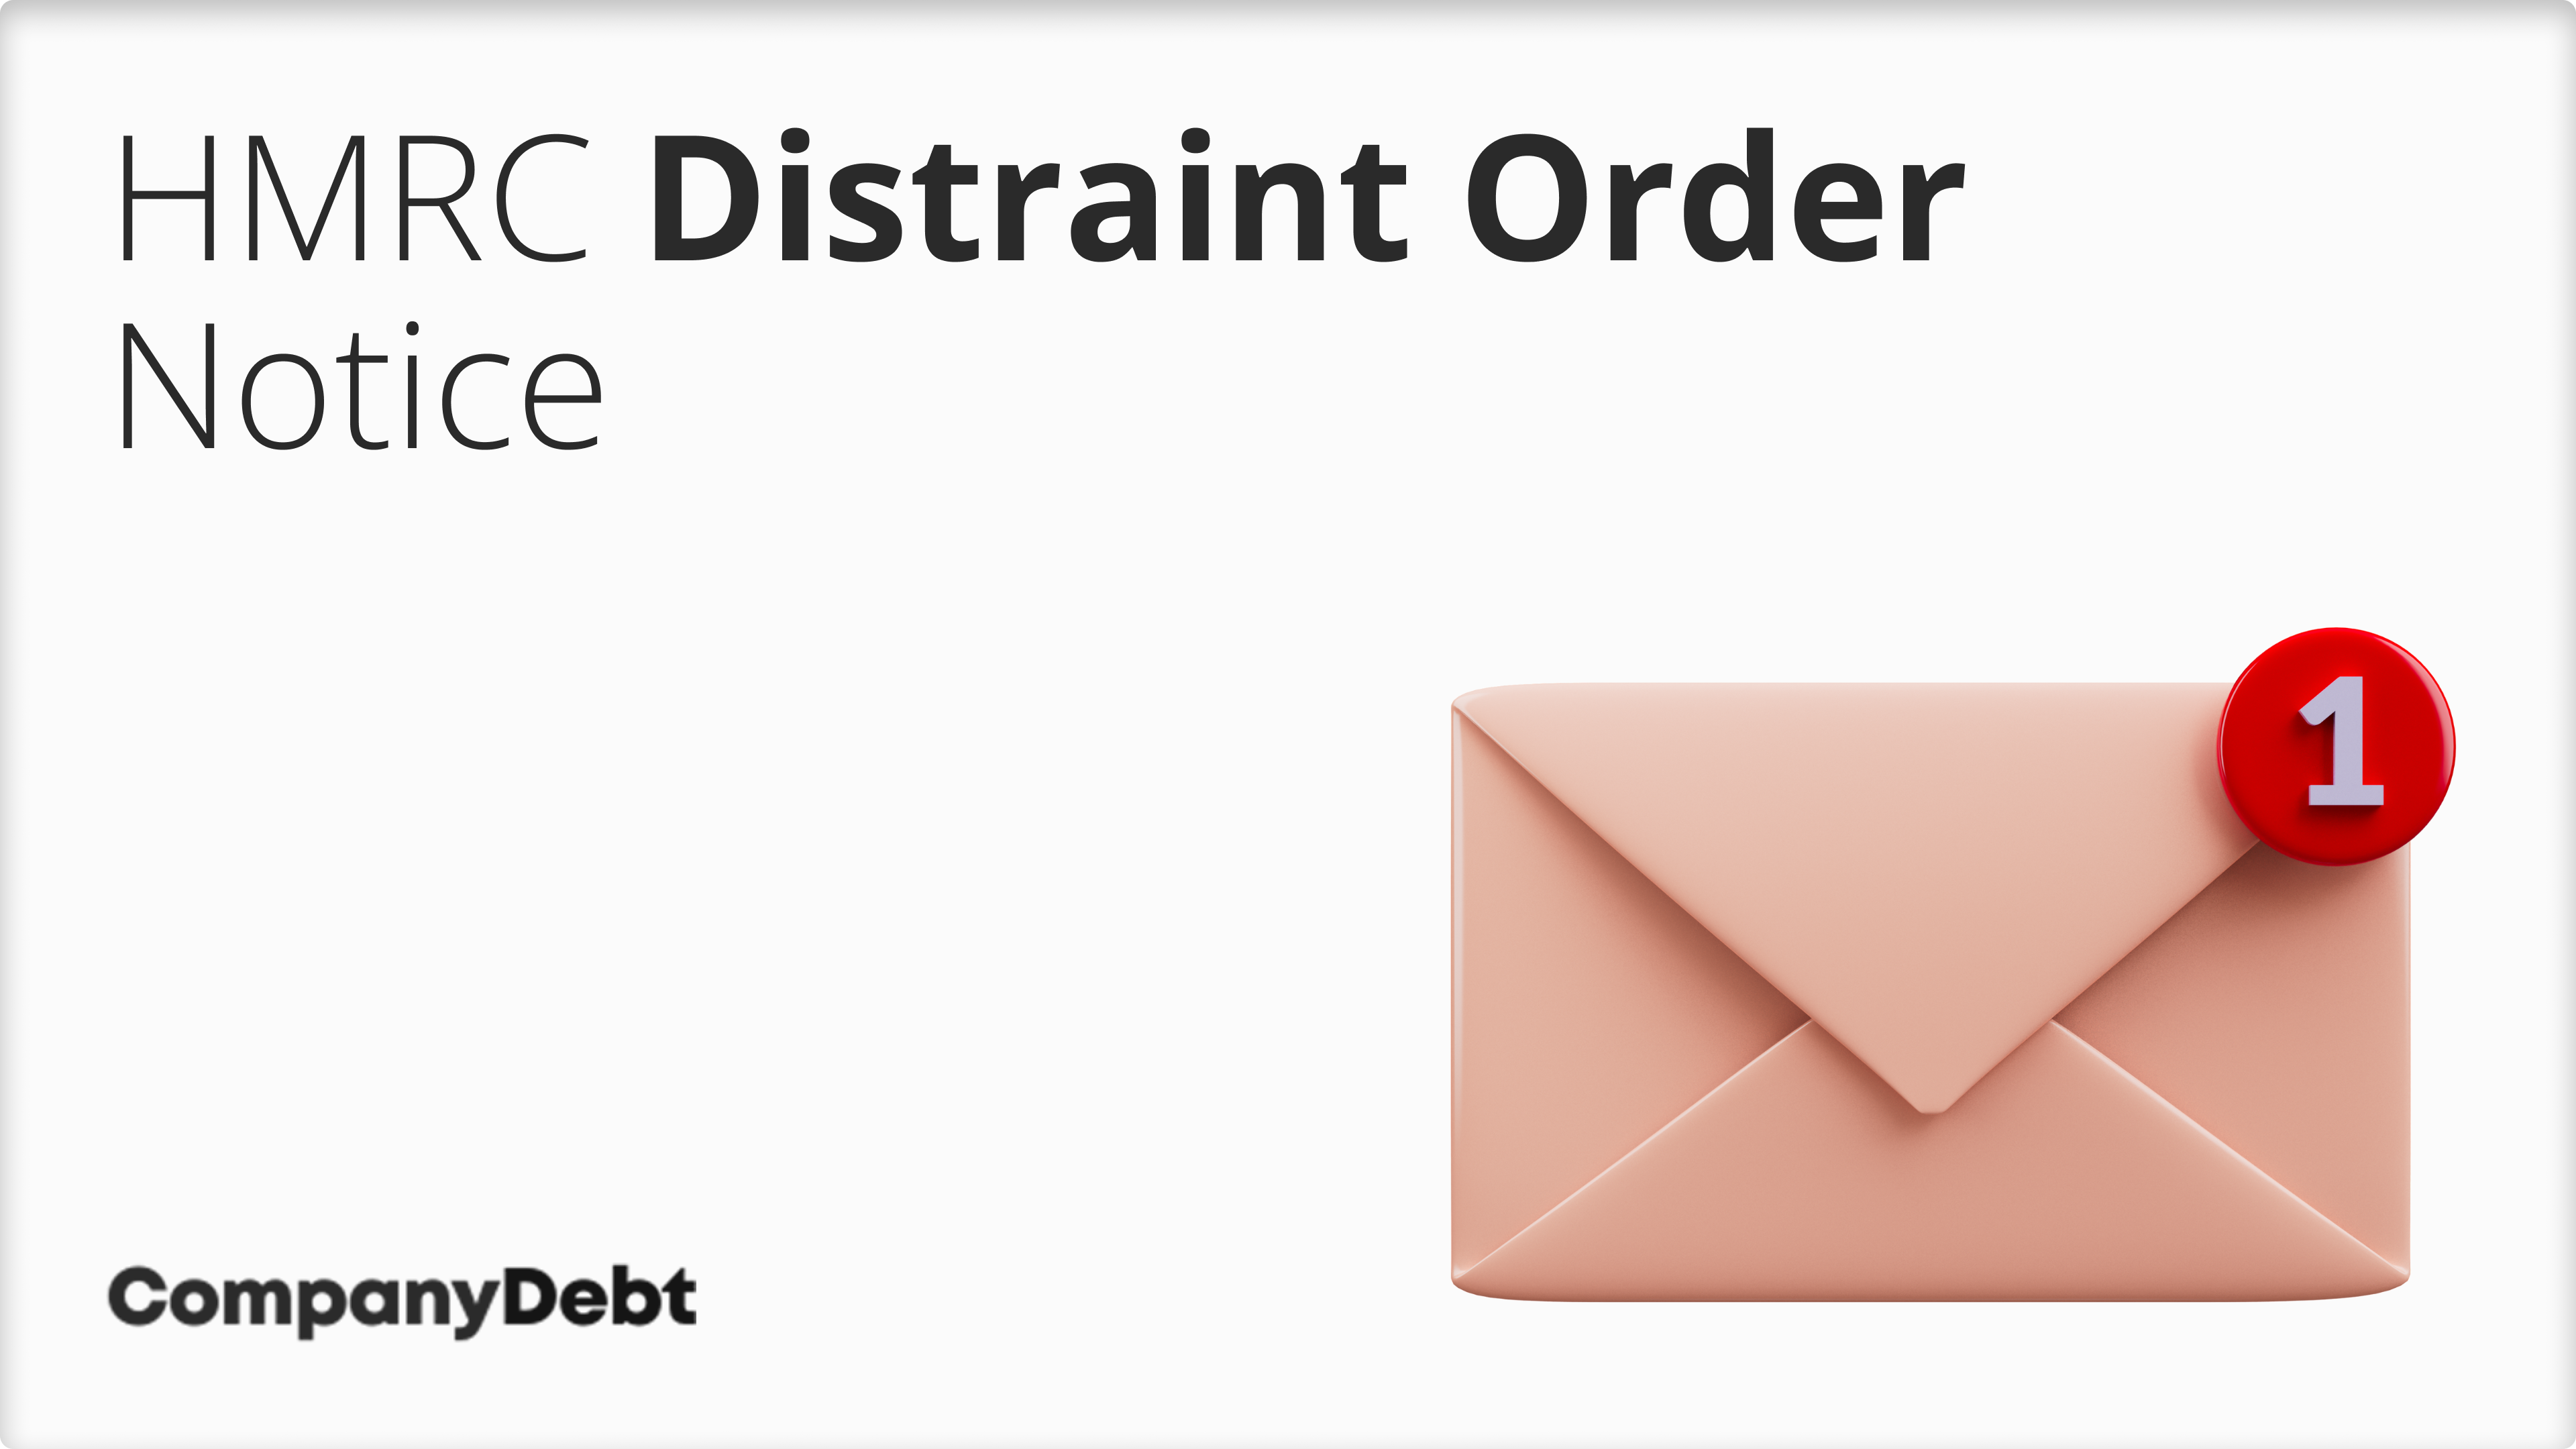 What to Do if You've Received a Distraint Order Notice?